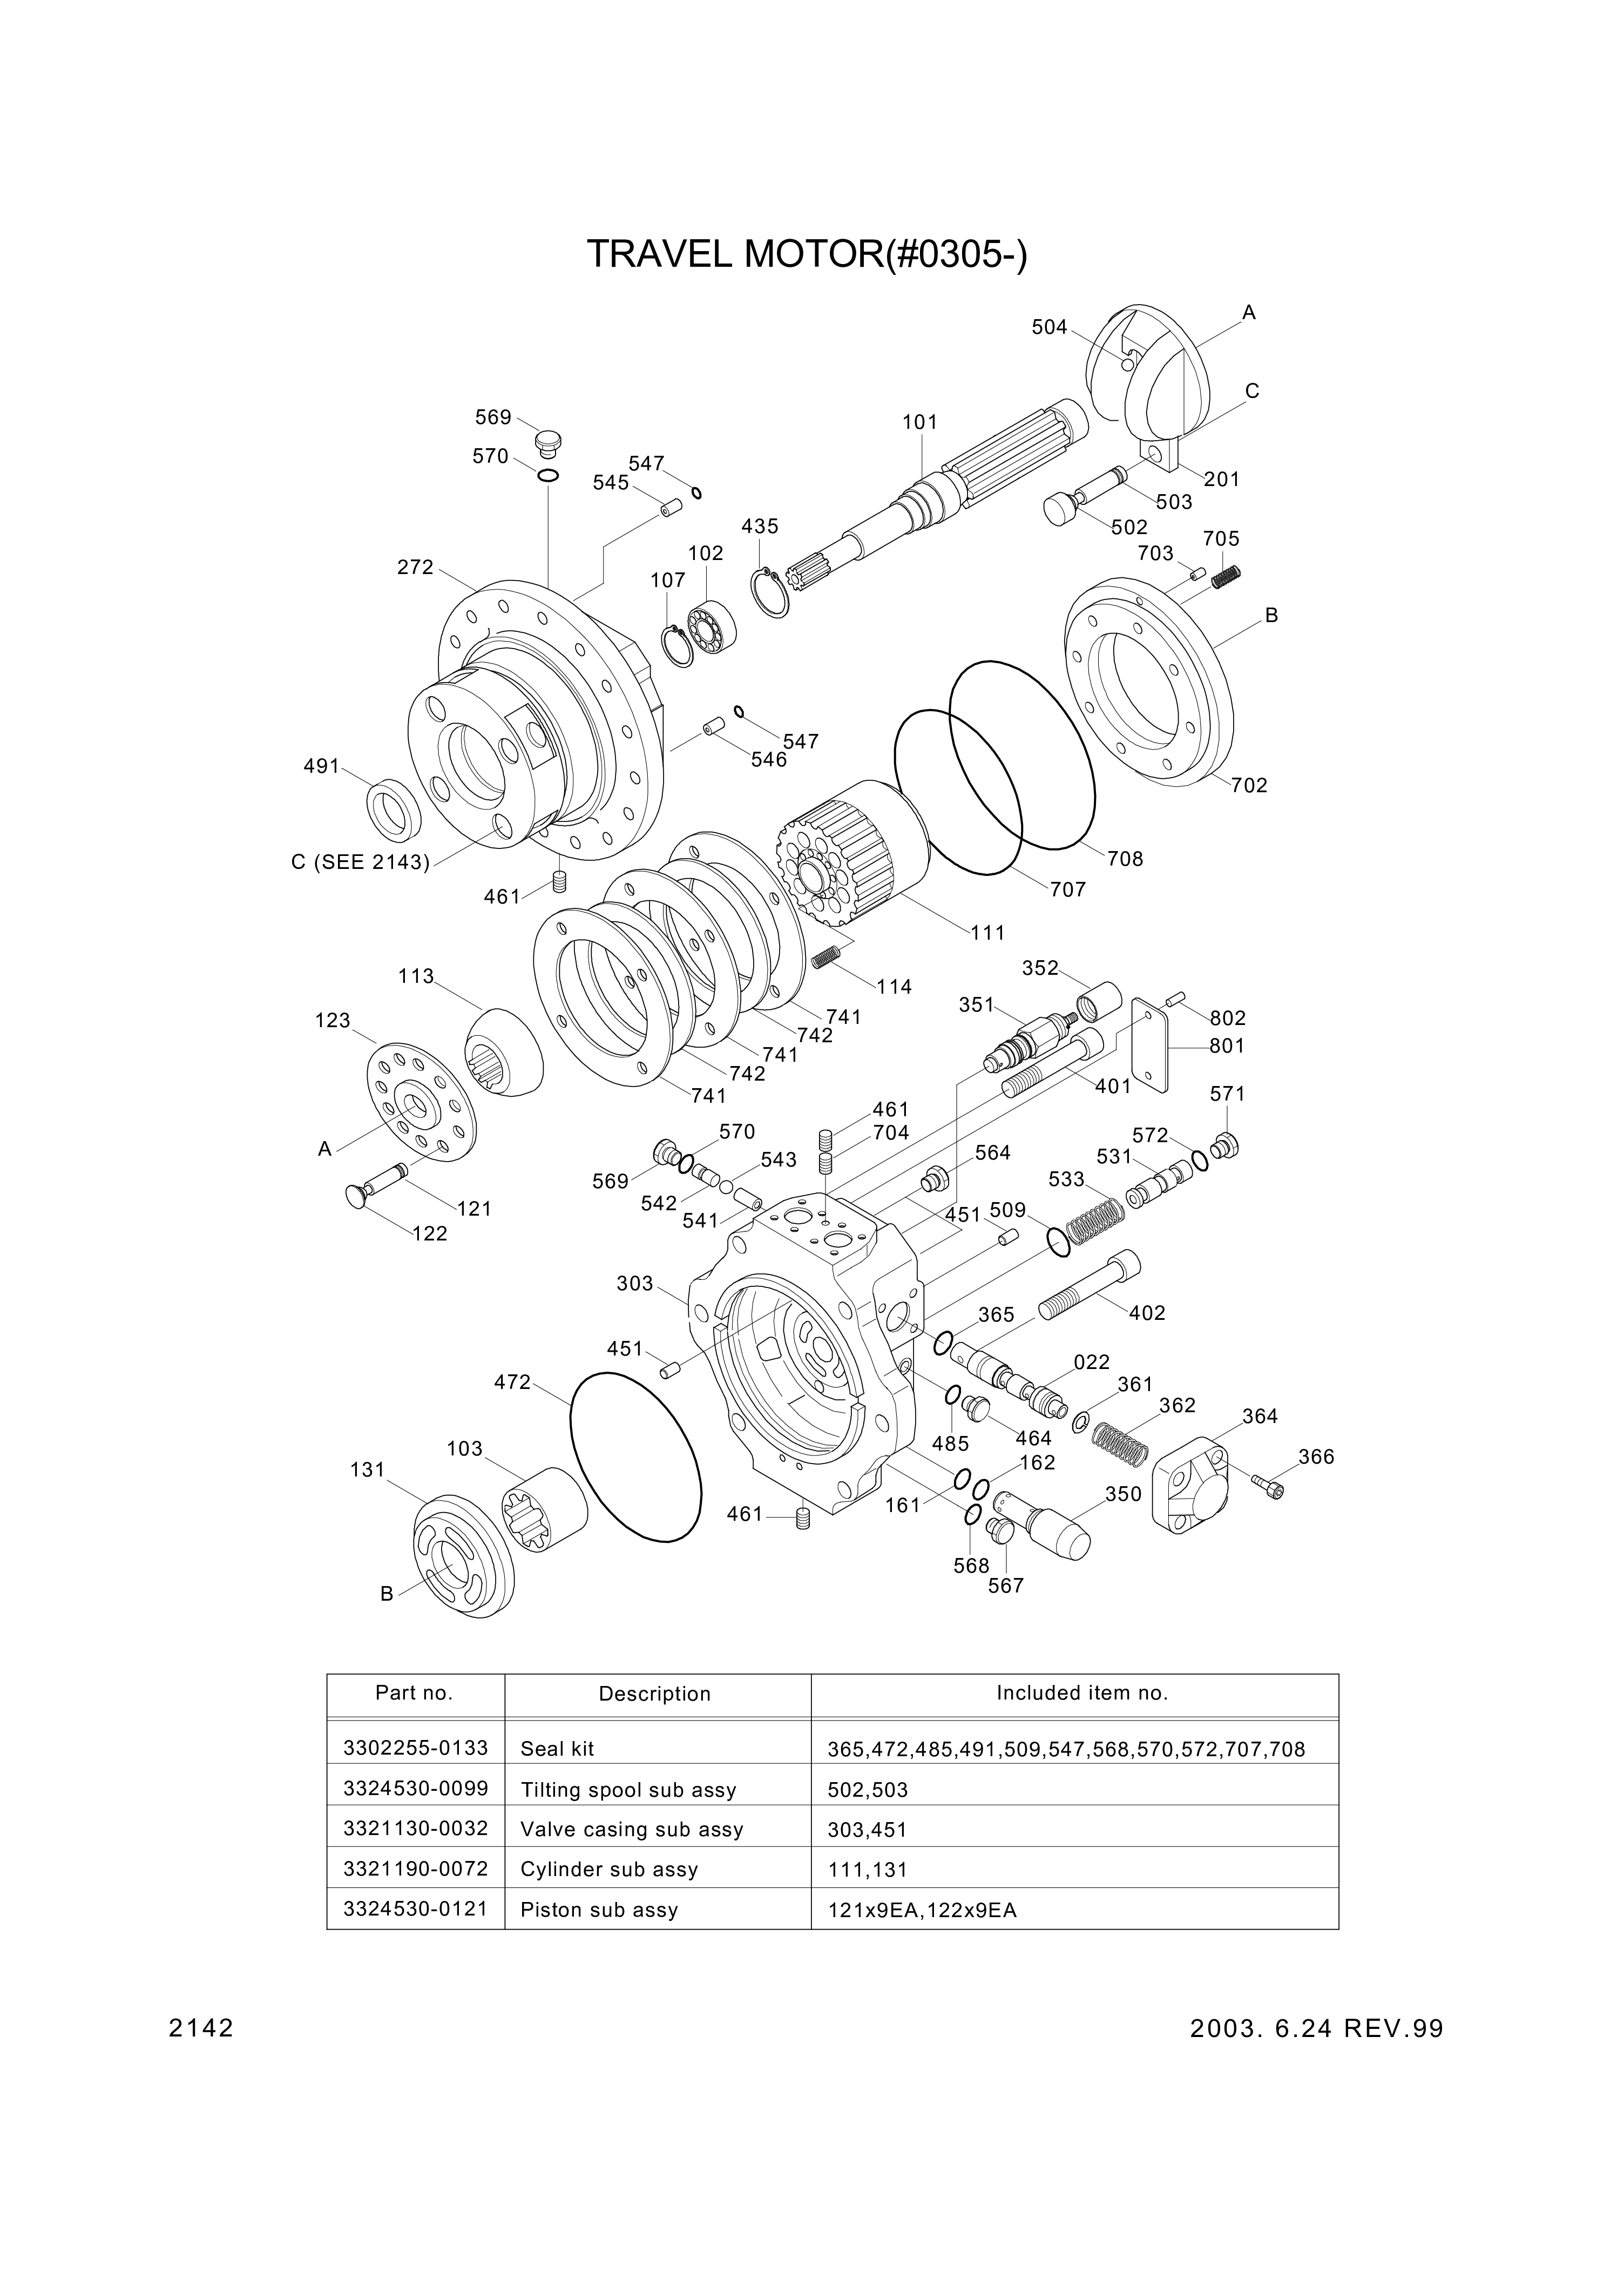 drawing for Hyundai Construction Equipment 3570D-03C - T/REDUCTION GEAR (figure 1)